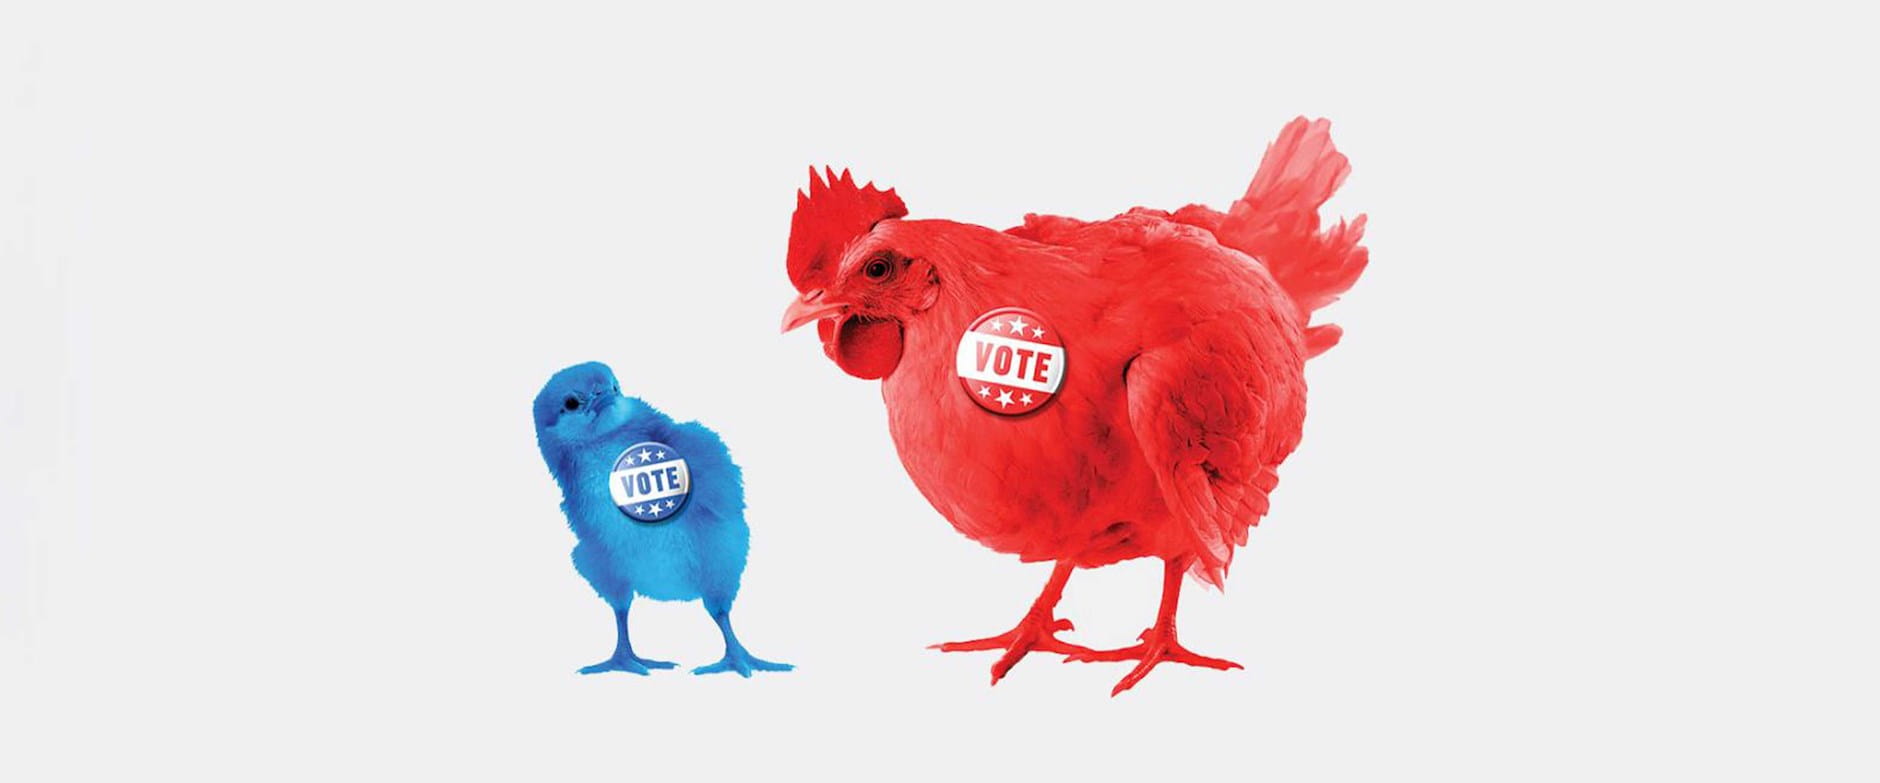 Blue chick with a red chicken wearing buttons that say vote